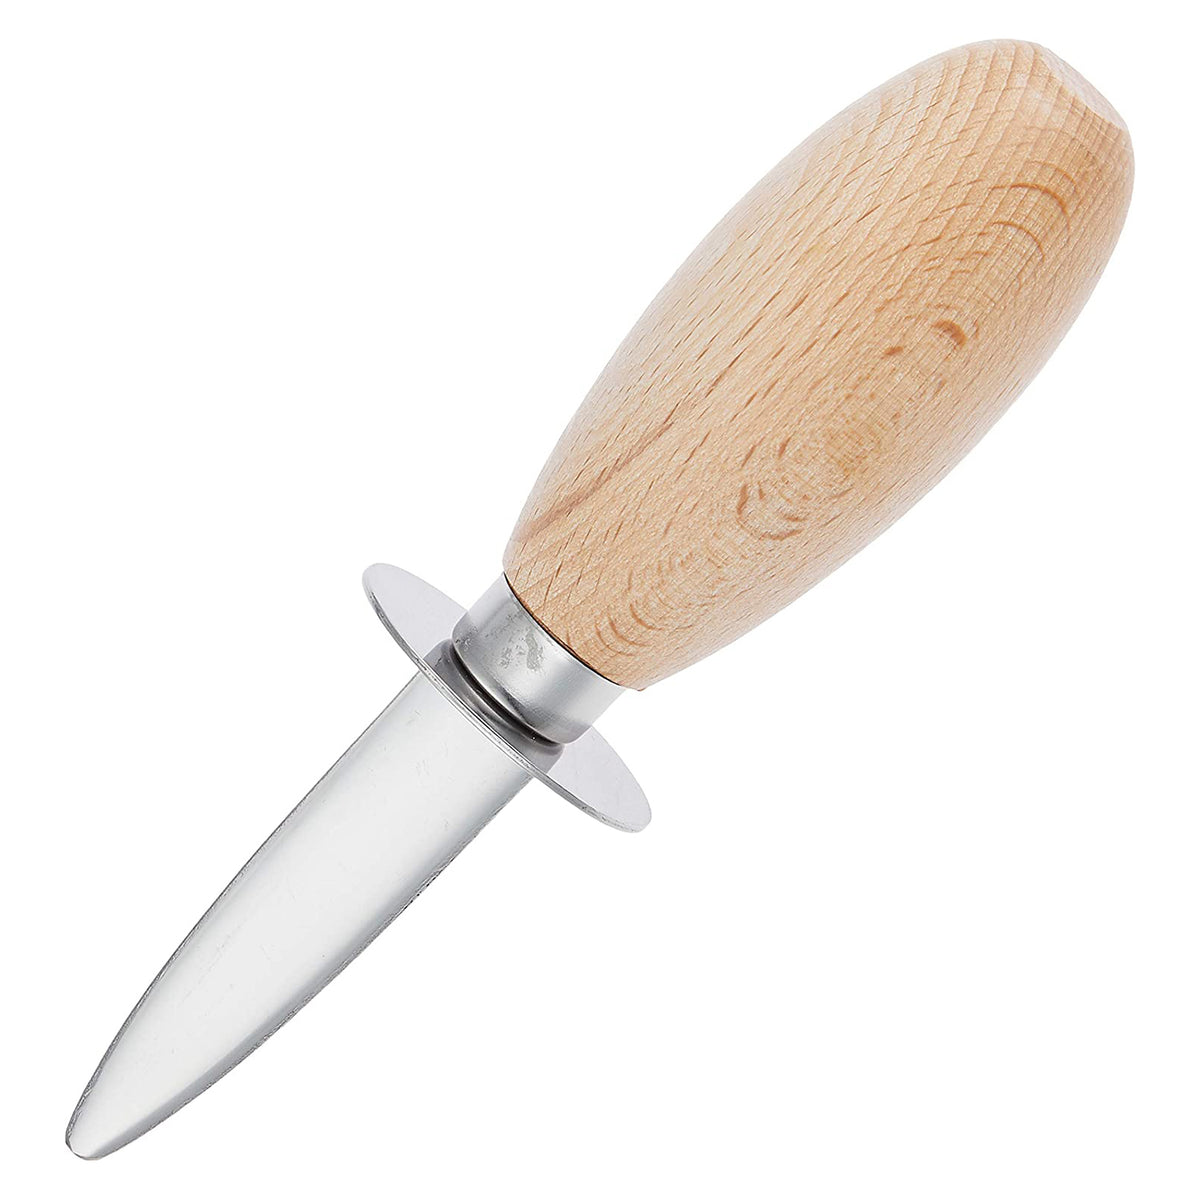 Wood Oyster Brush With Oyster Shucking Knife Kit For Kitchen